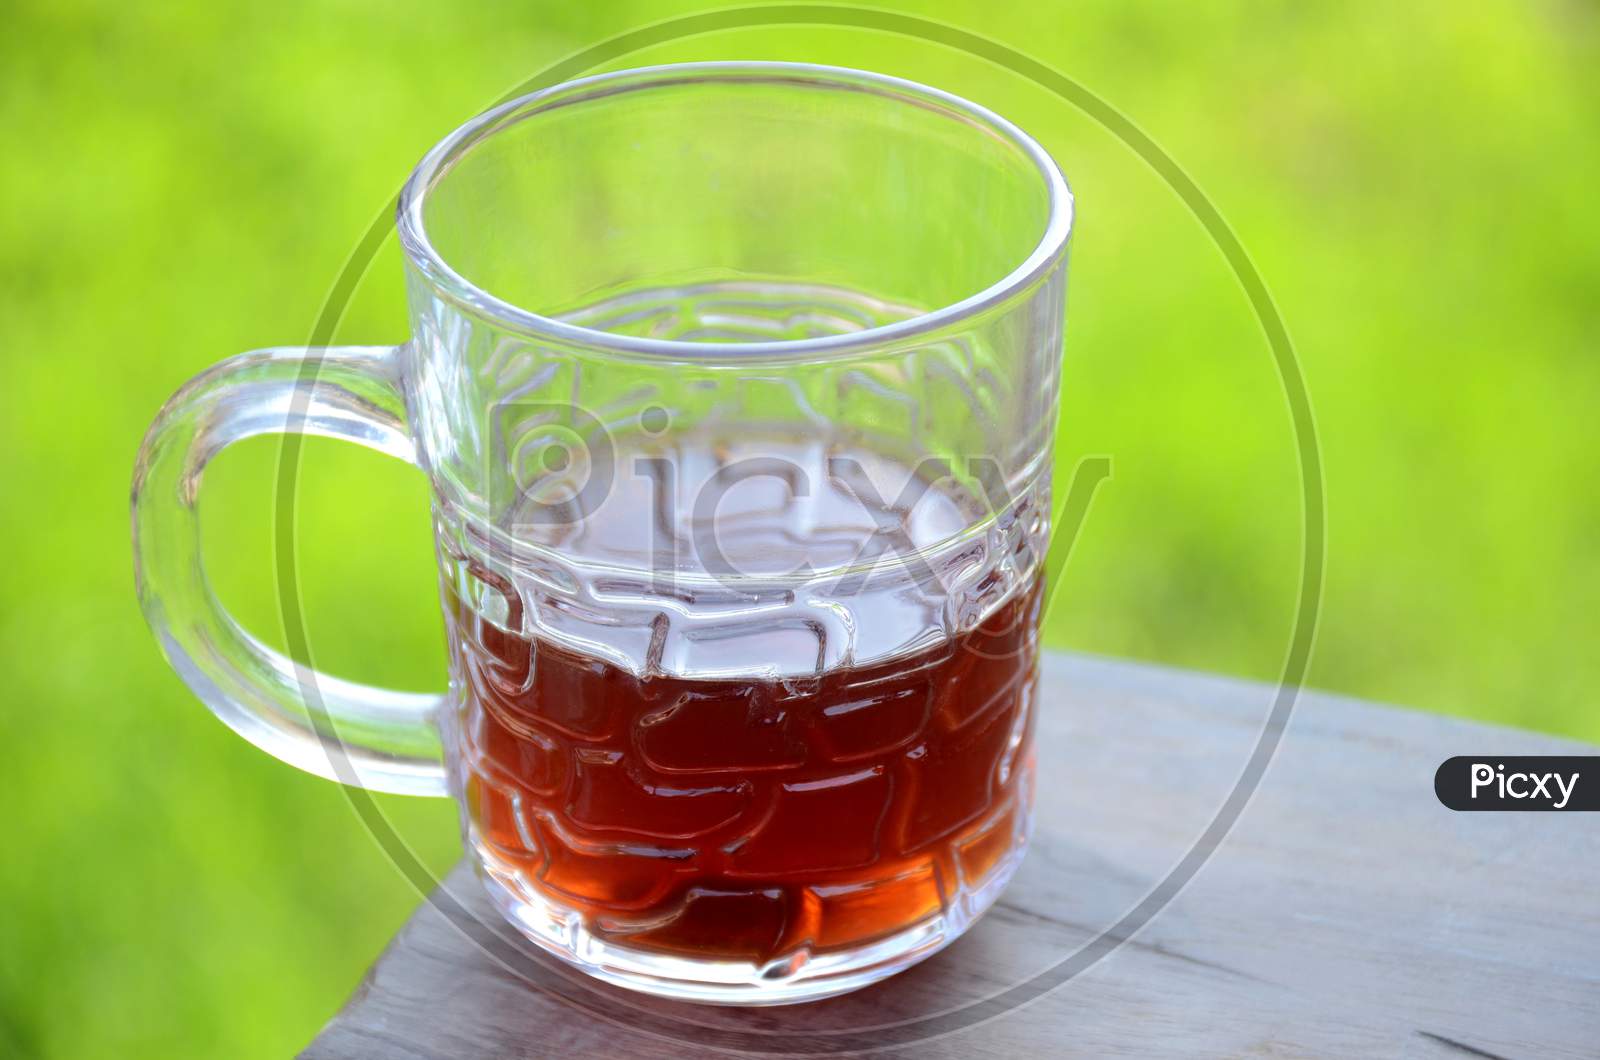 The Black Lemon Tea In The Glass Cup On The Wooden Brown And Green Background.